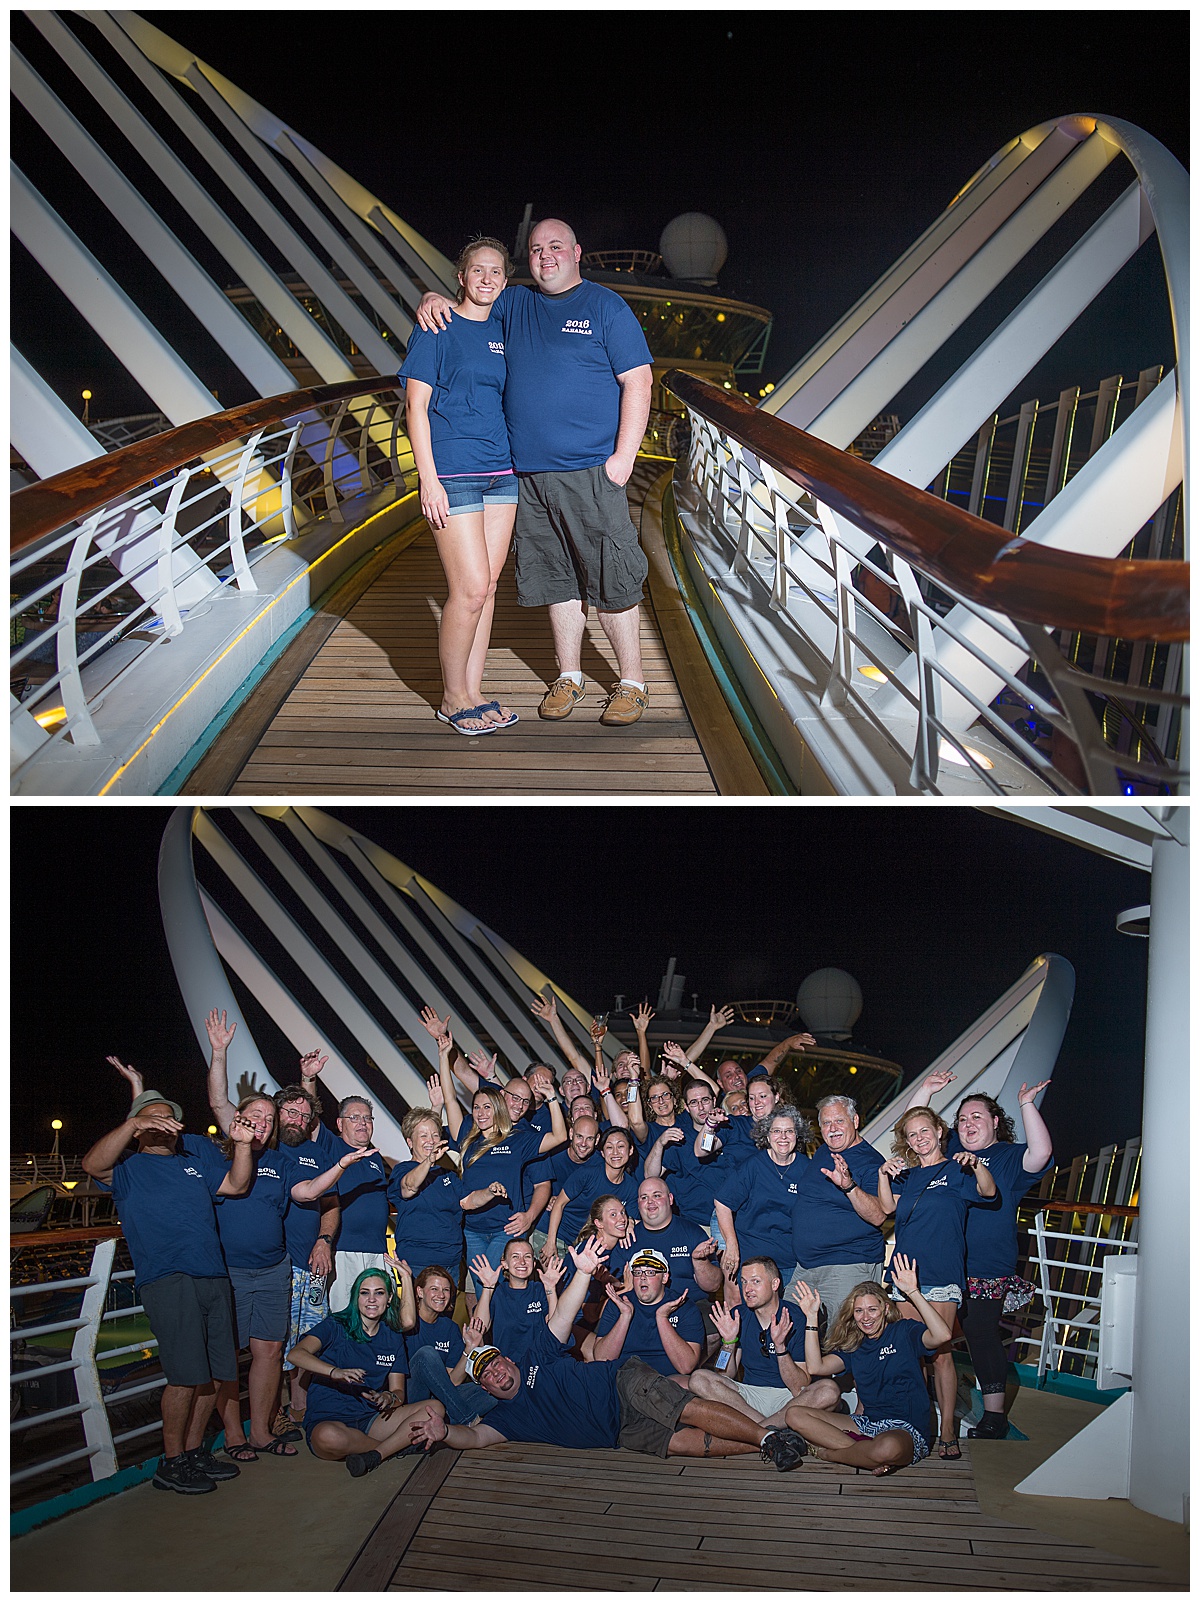 Group photo of wedding guests on a cruise ship for a destination wedding, Destination wedding photography by Bokeh Love Photography